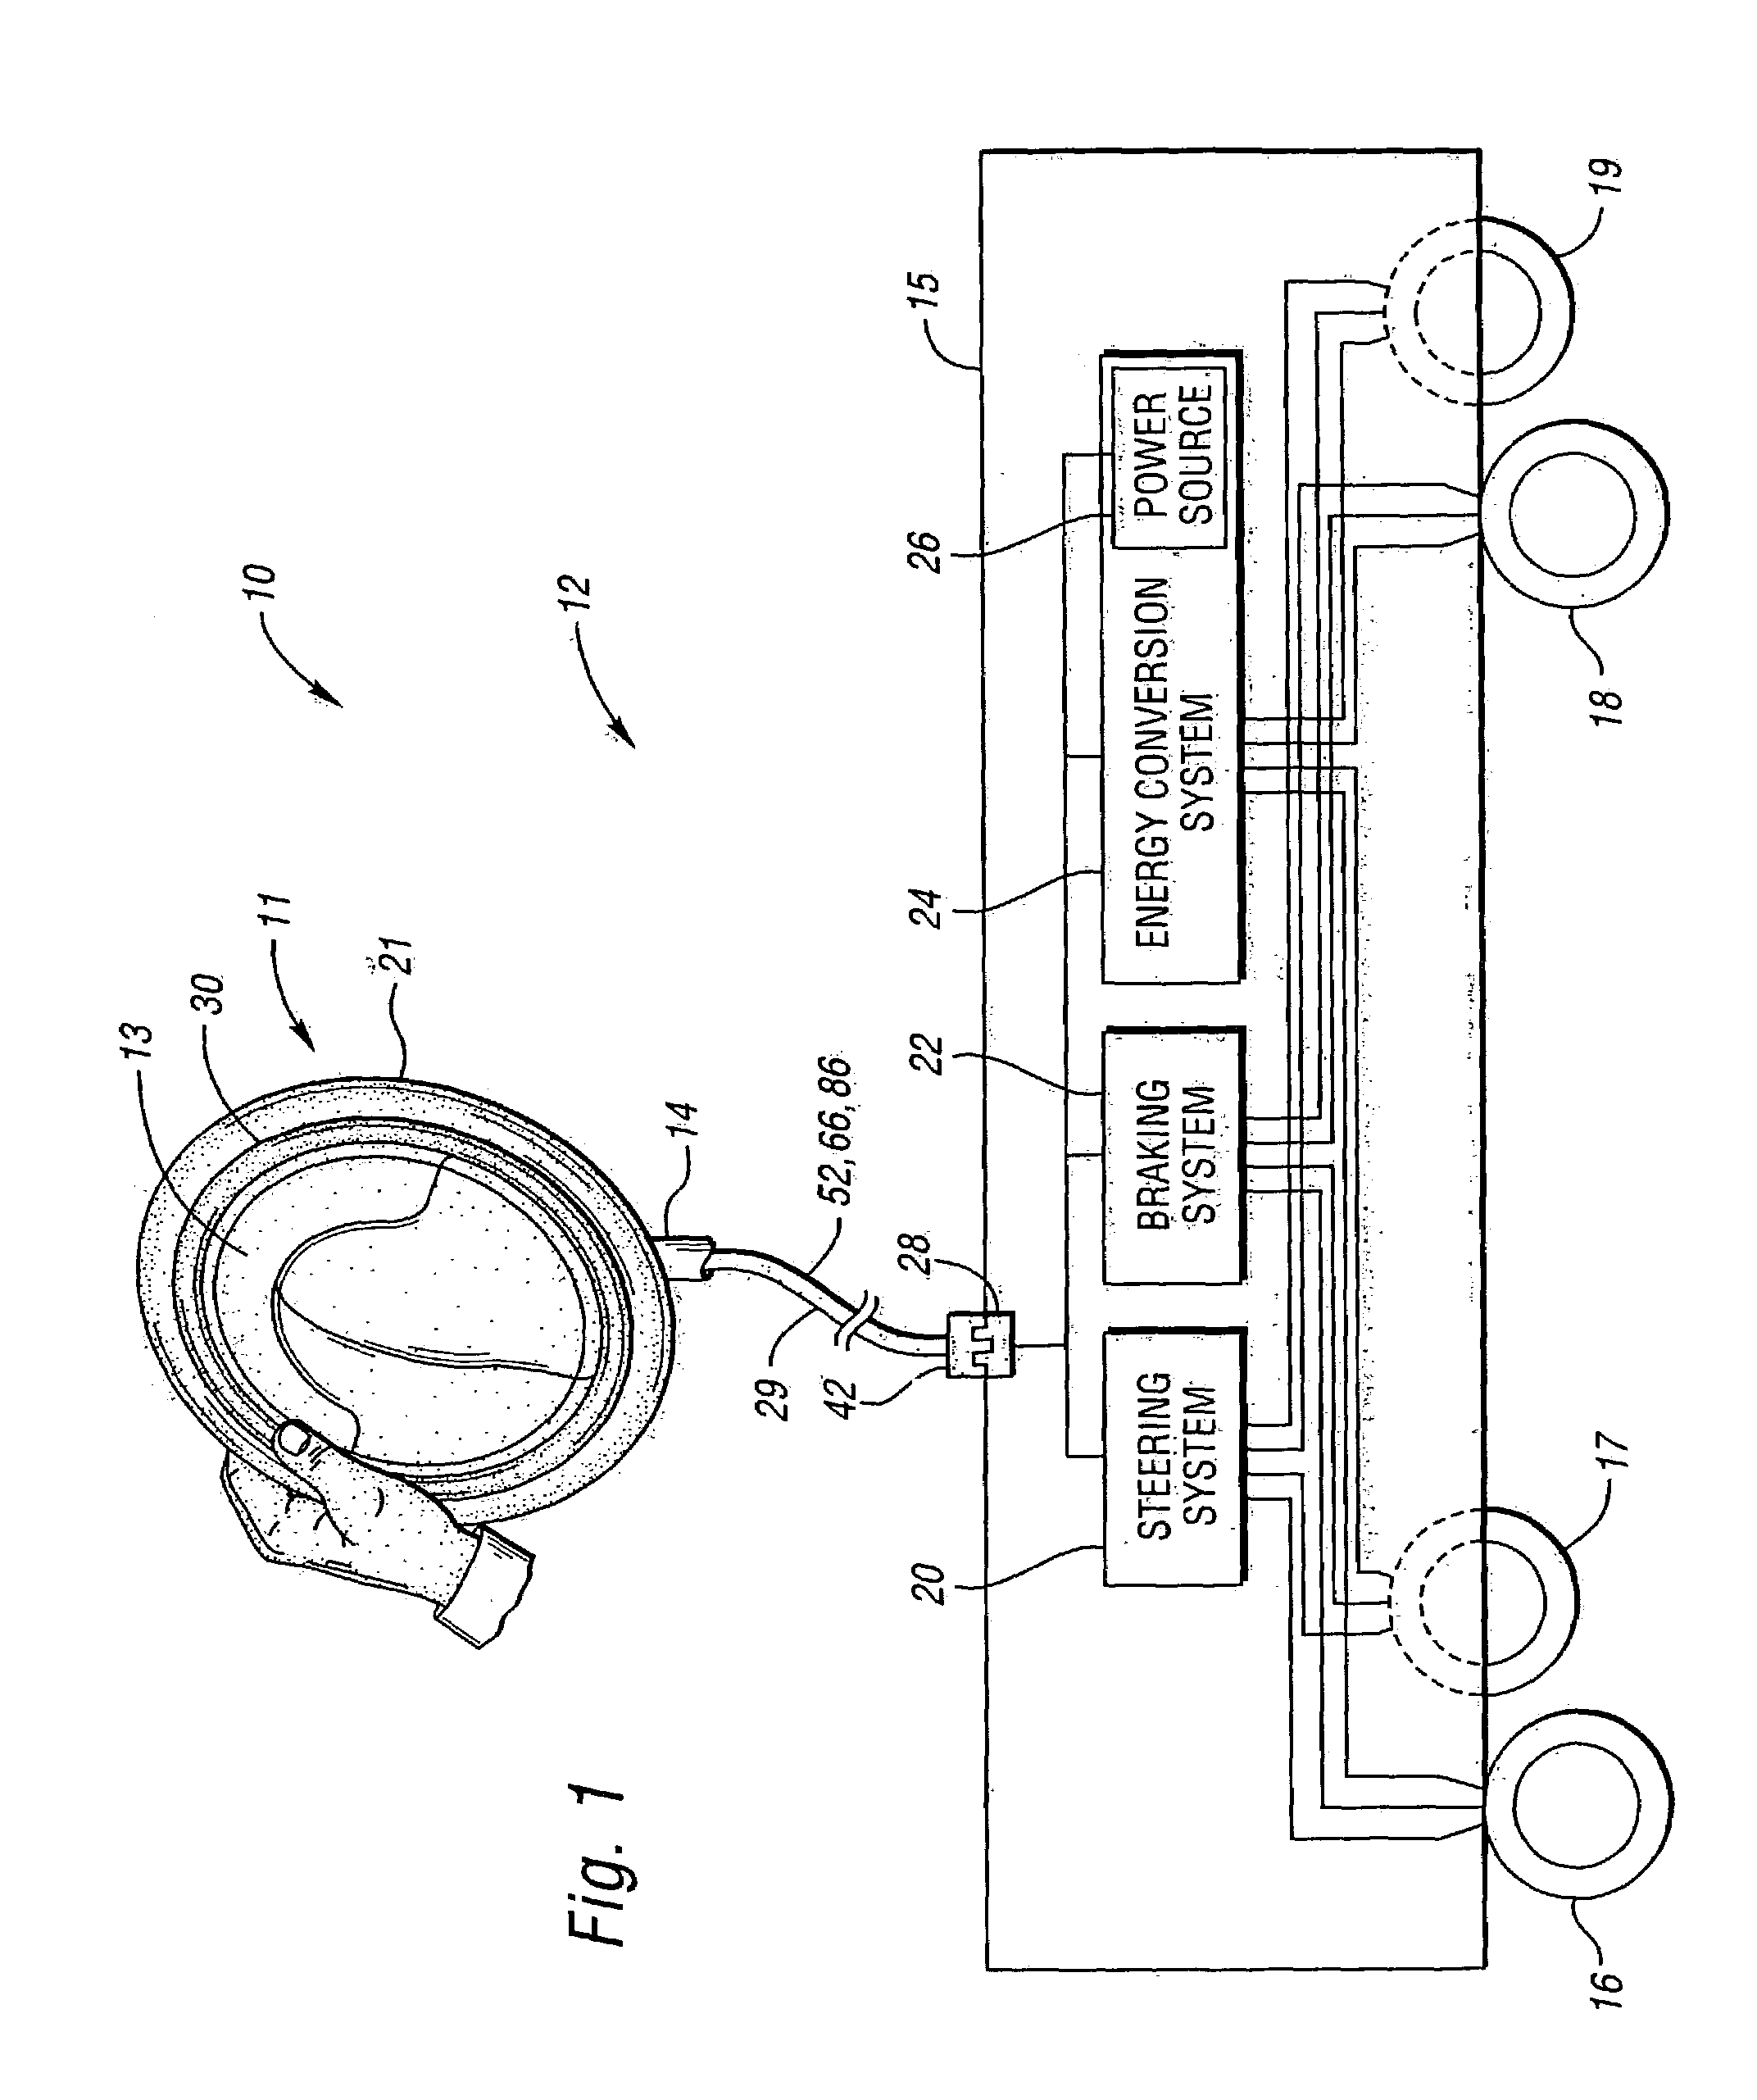 Driver control input device for drive-by-wire system